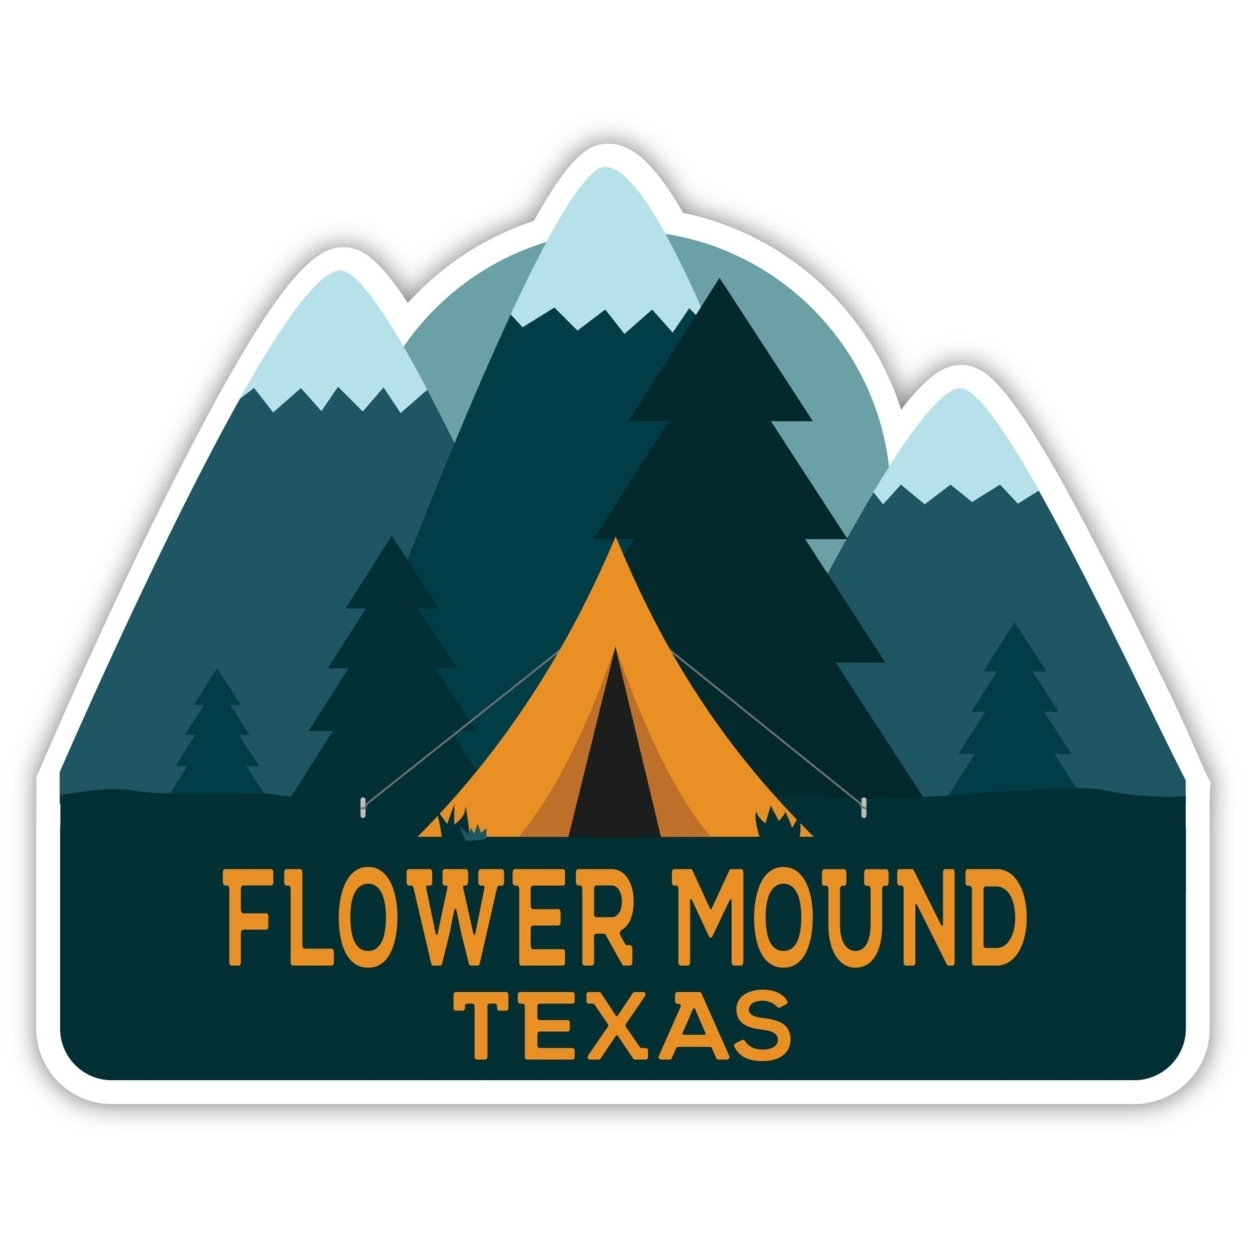 Flower Mound Texas Souvenir Decorative Stickers (Choose Theme And Size) - 4-Pack, 10-Inch, Bear